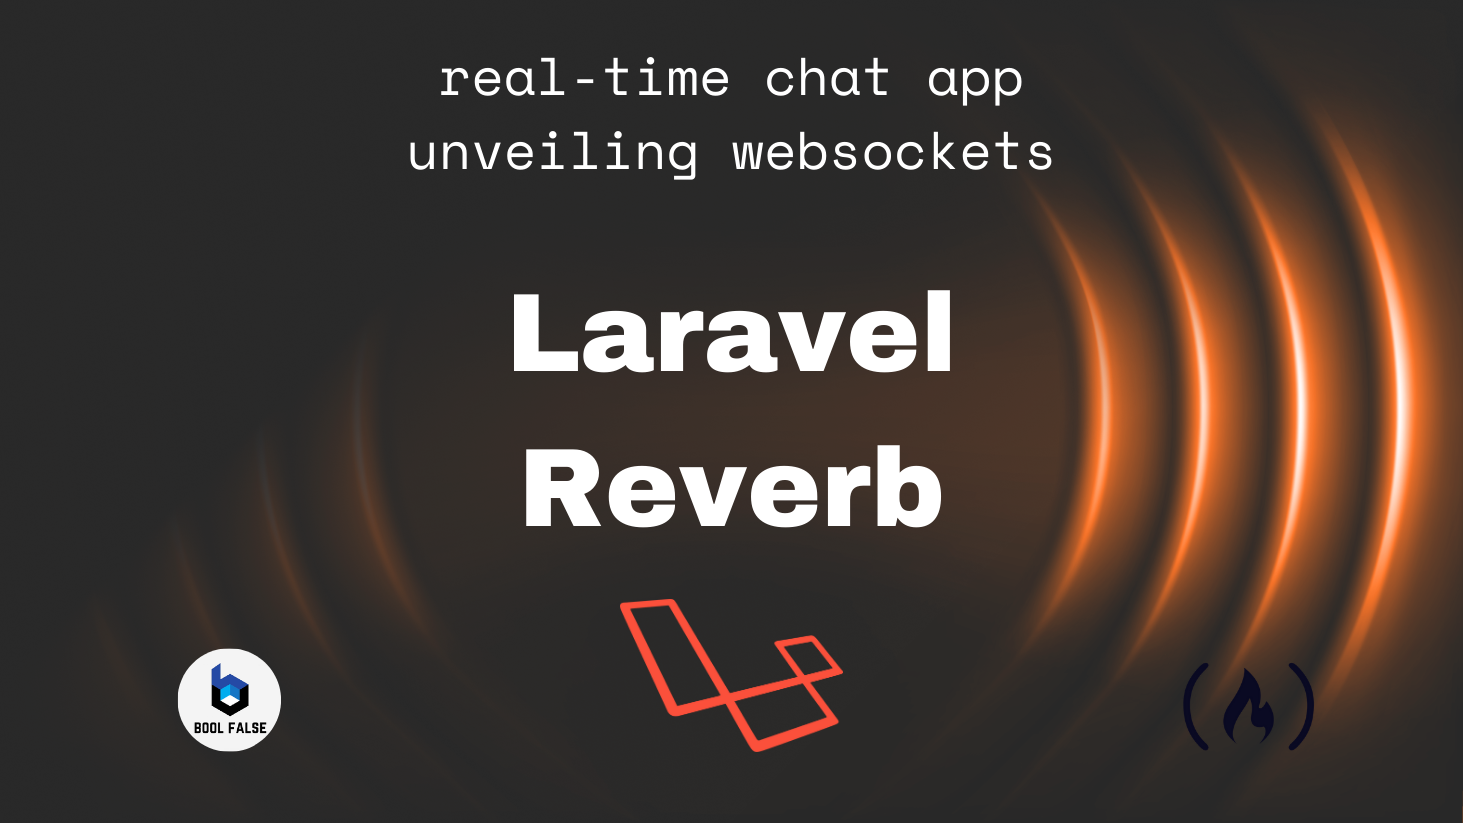 How to Build Real-Time Chat App with Laravel Reverb